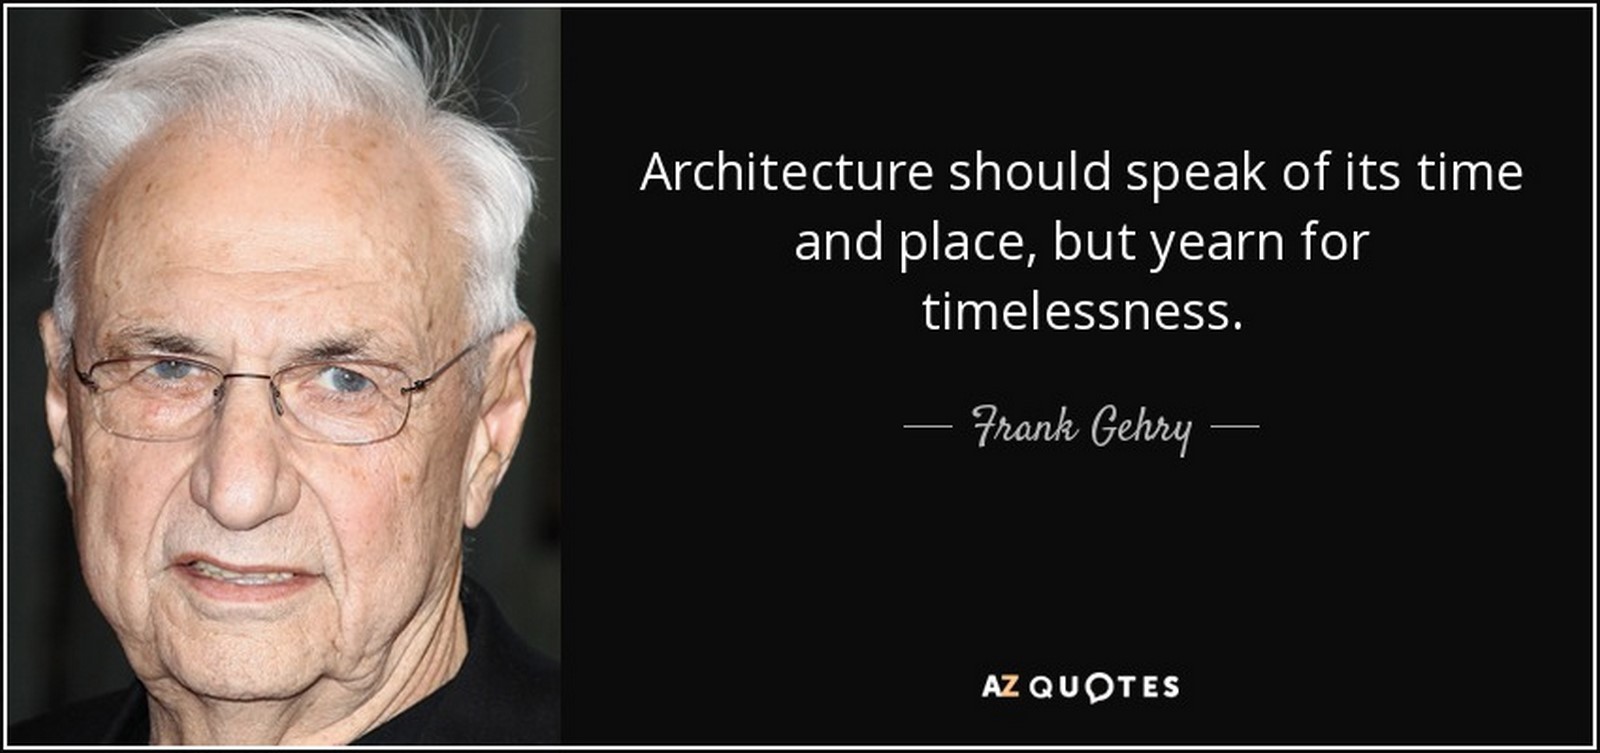 50 Famous Architects Quotes - Sheet1